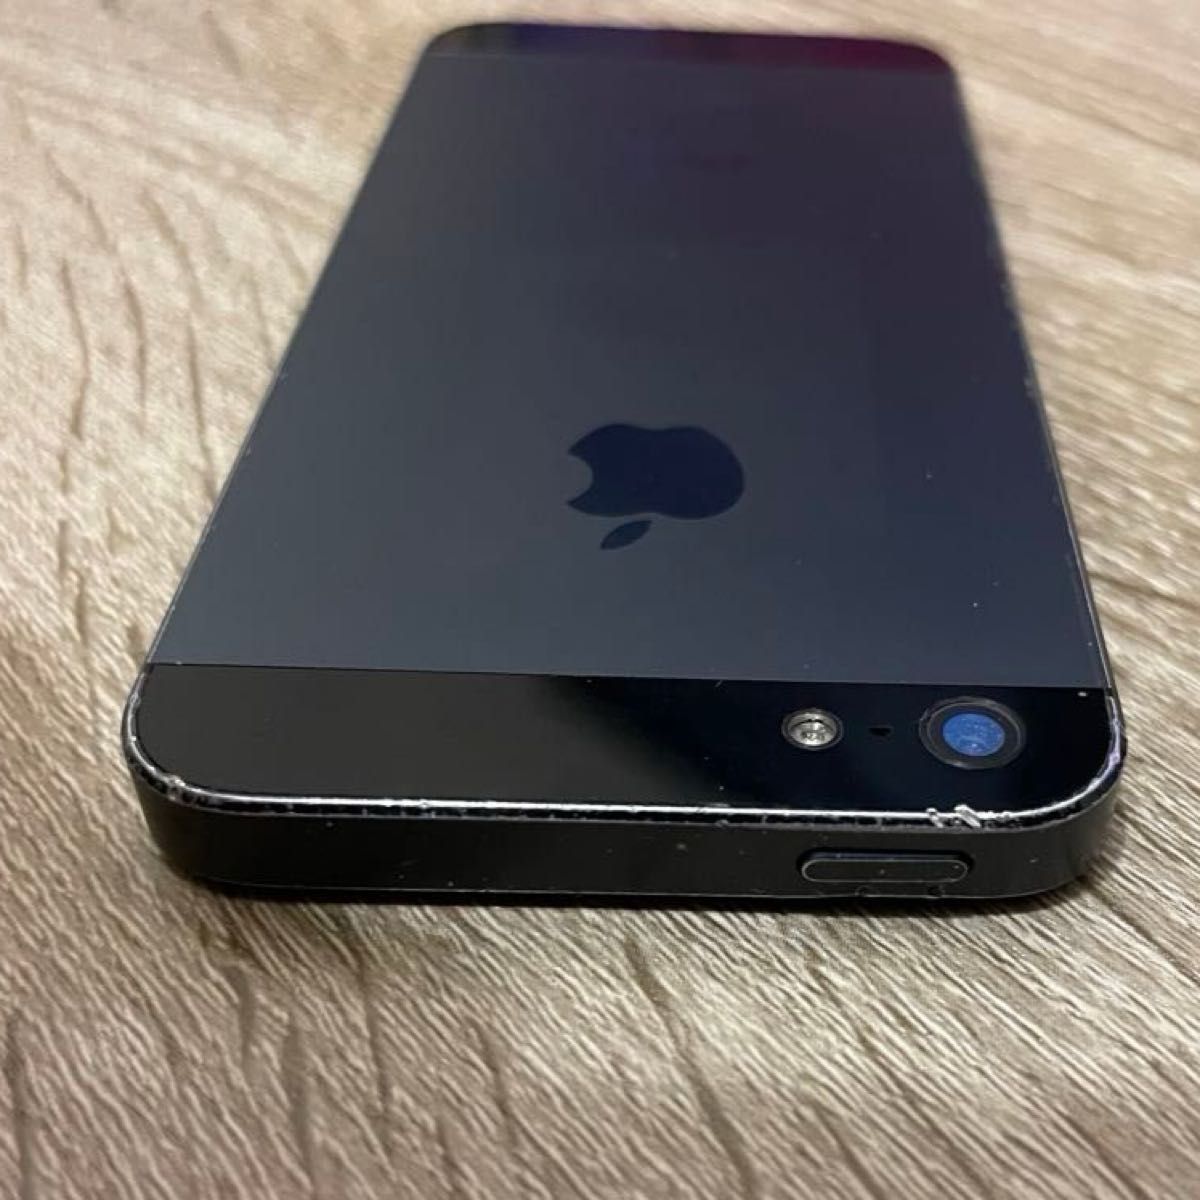 iPhone5 64GB 初期化済み